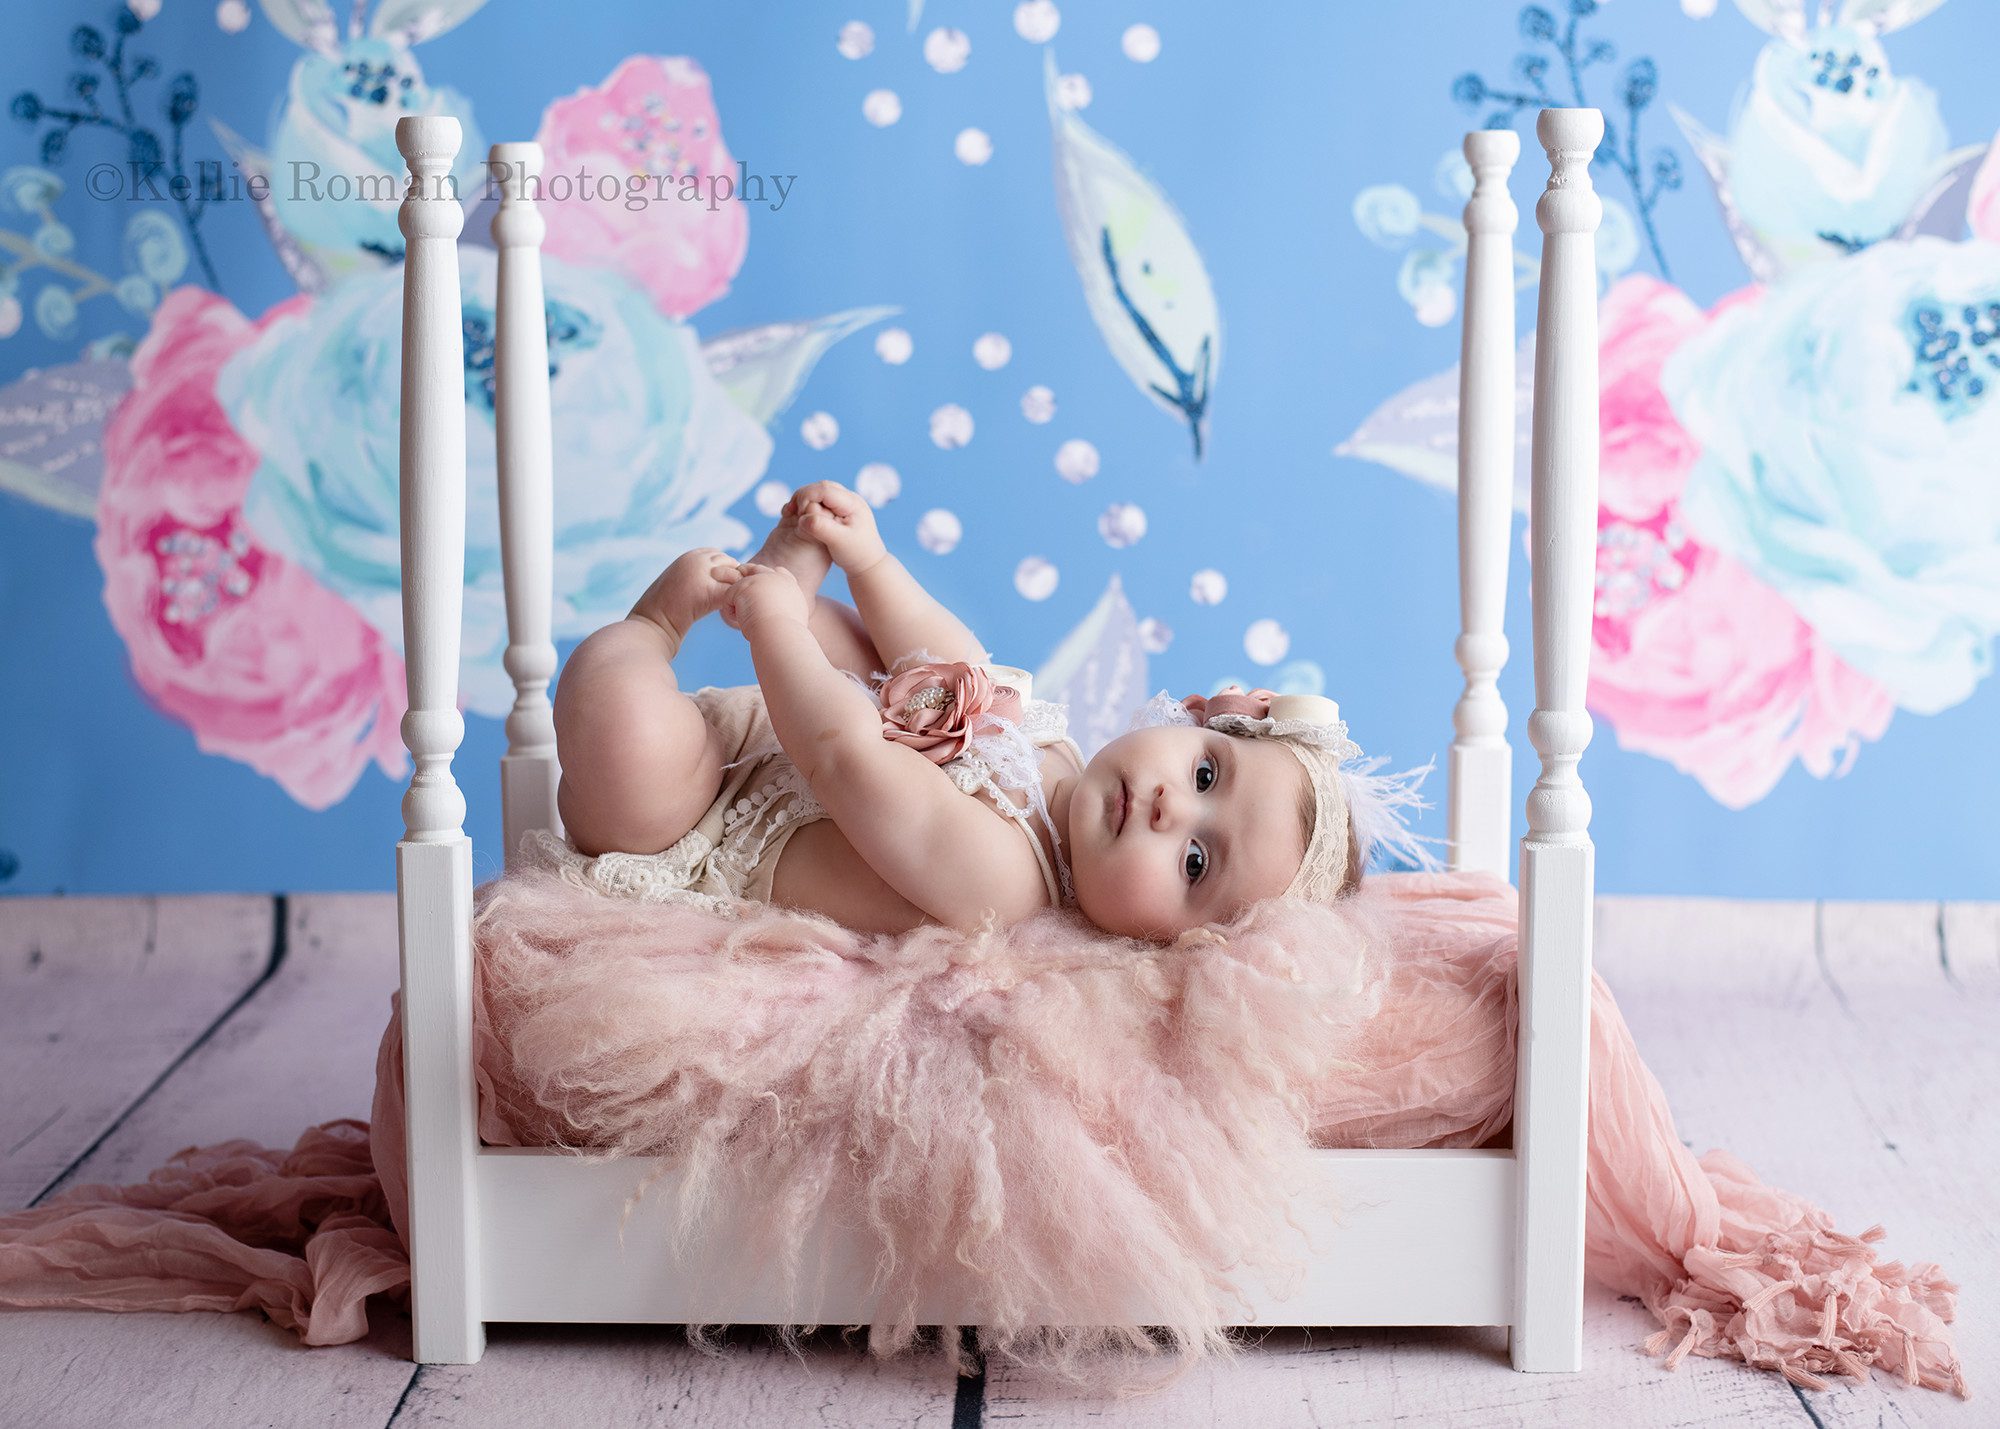 six month session a sweet baby who is six months old is being photographed in milwaukee studio she's on a white four post bed on top of pink fluff and fabric. she's playing with her toes on her back, and the backdrop is blue with white and pink florwers.